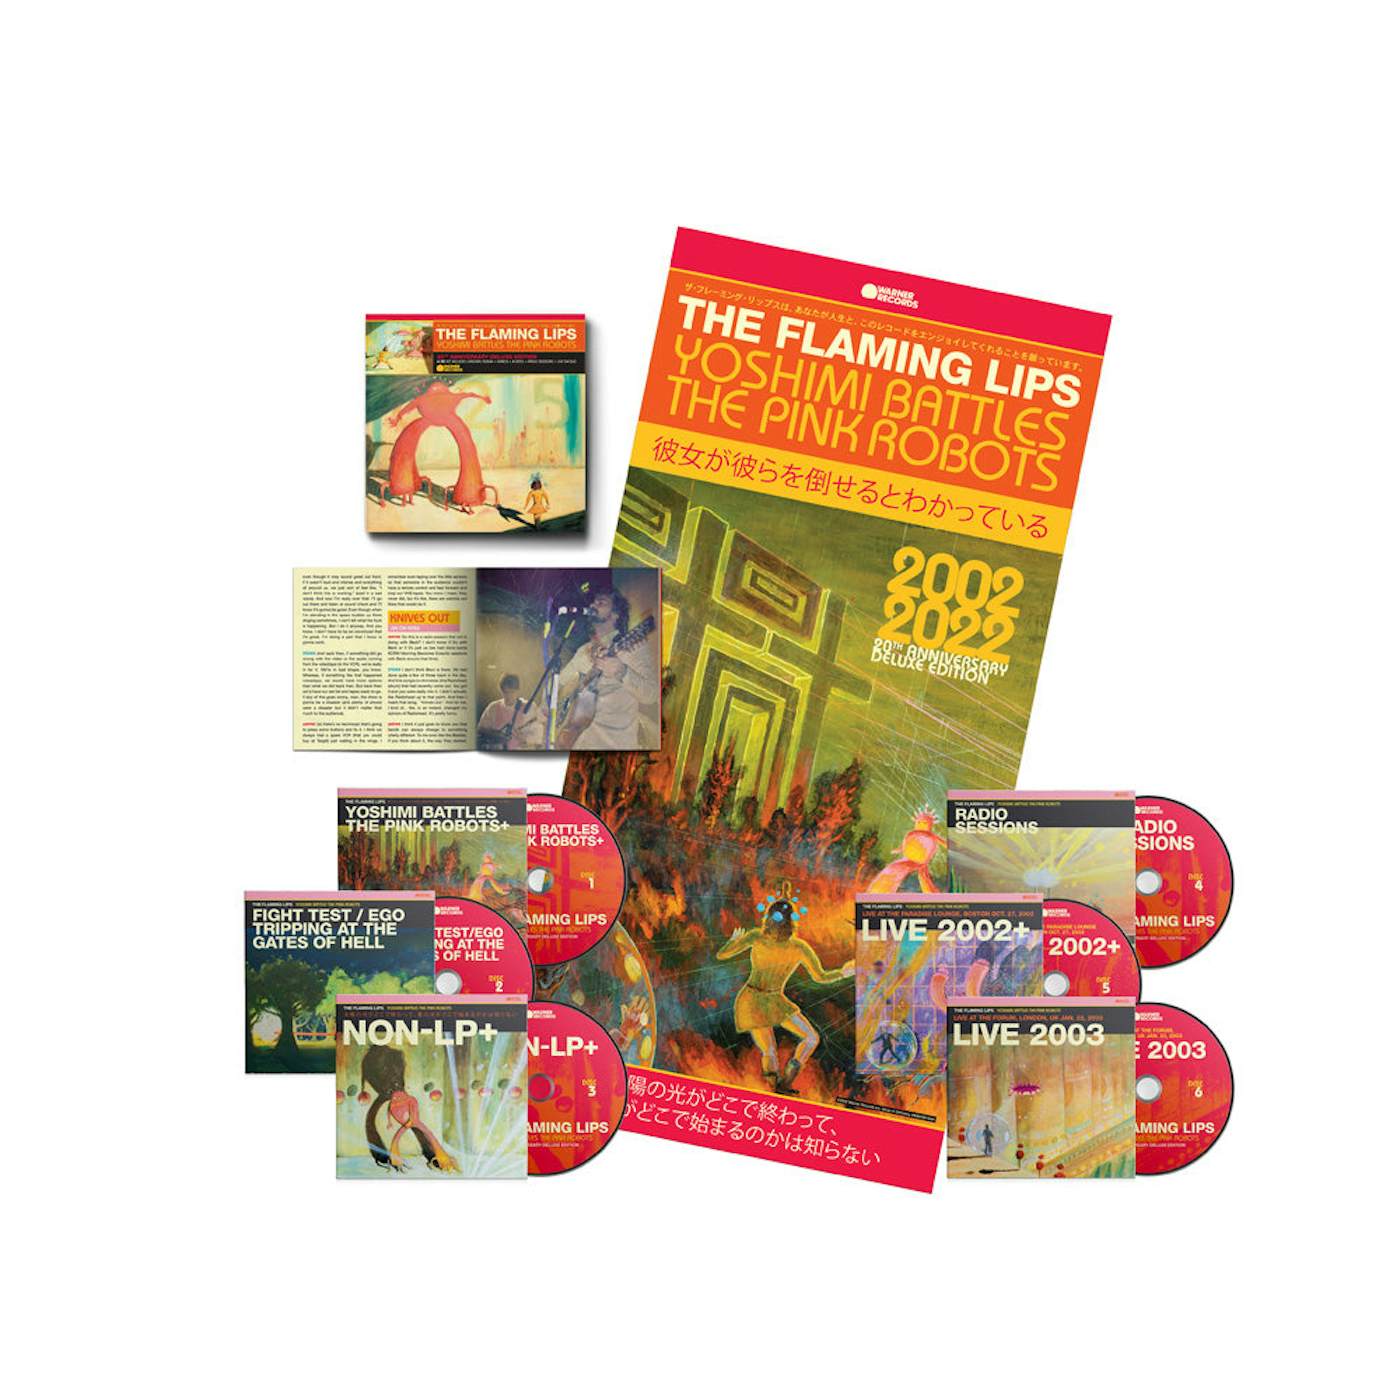 The Flaming Lips Yoshimi Battles the Pink Robots (Super Deluxe Edition) 20th Anniversary